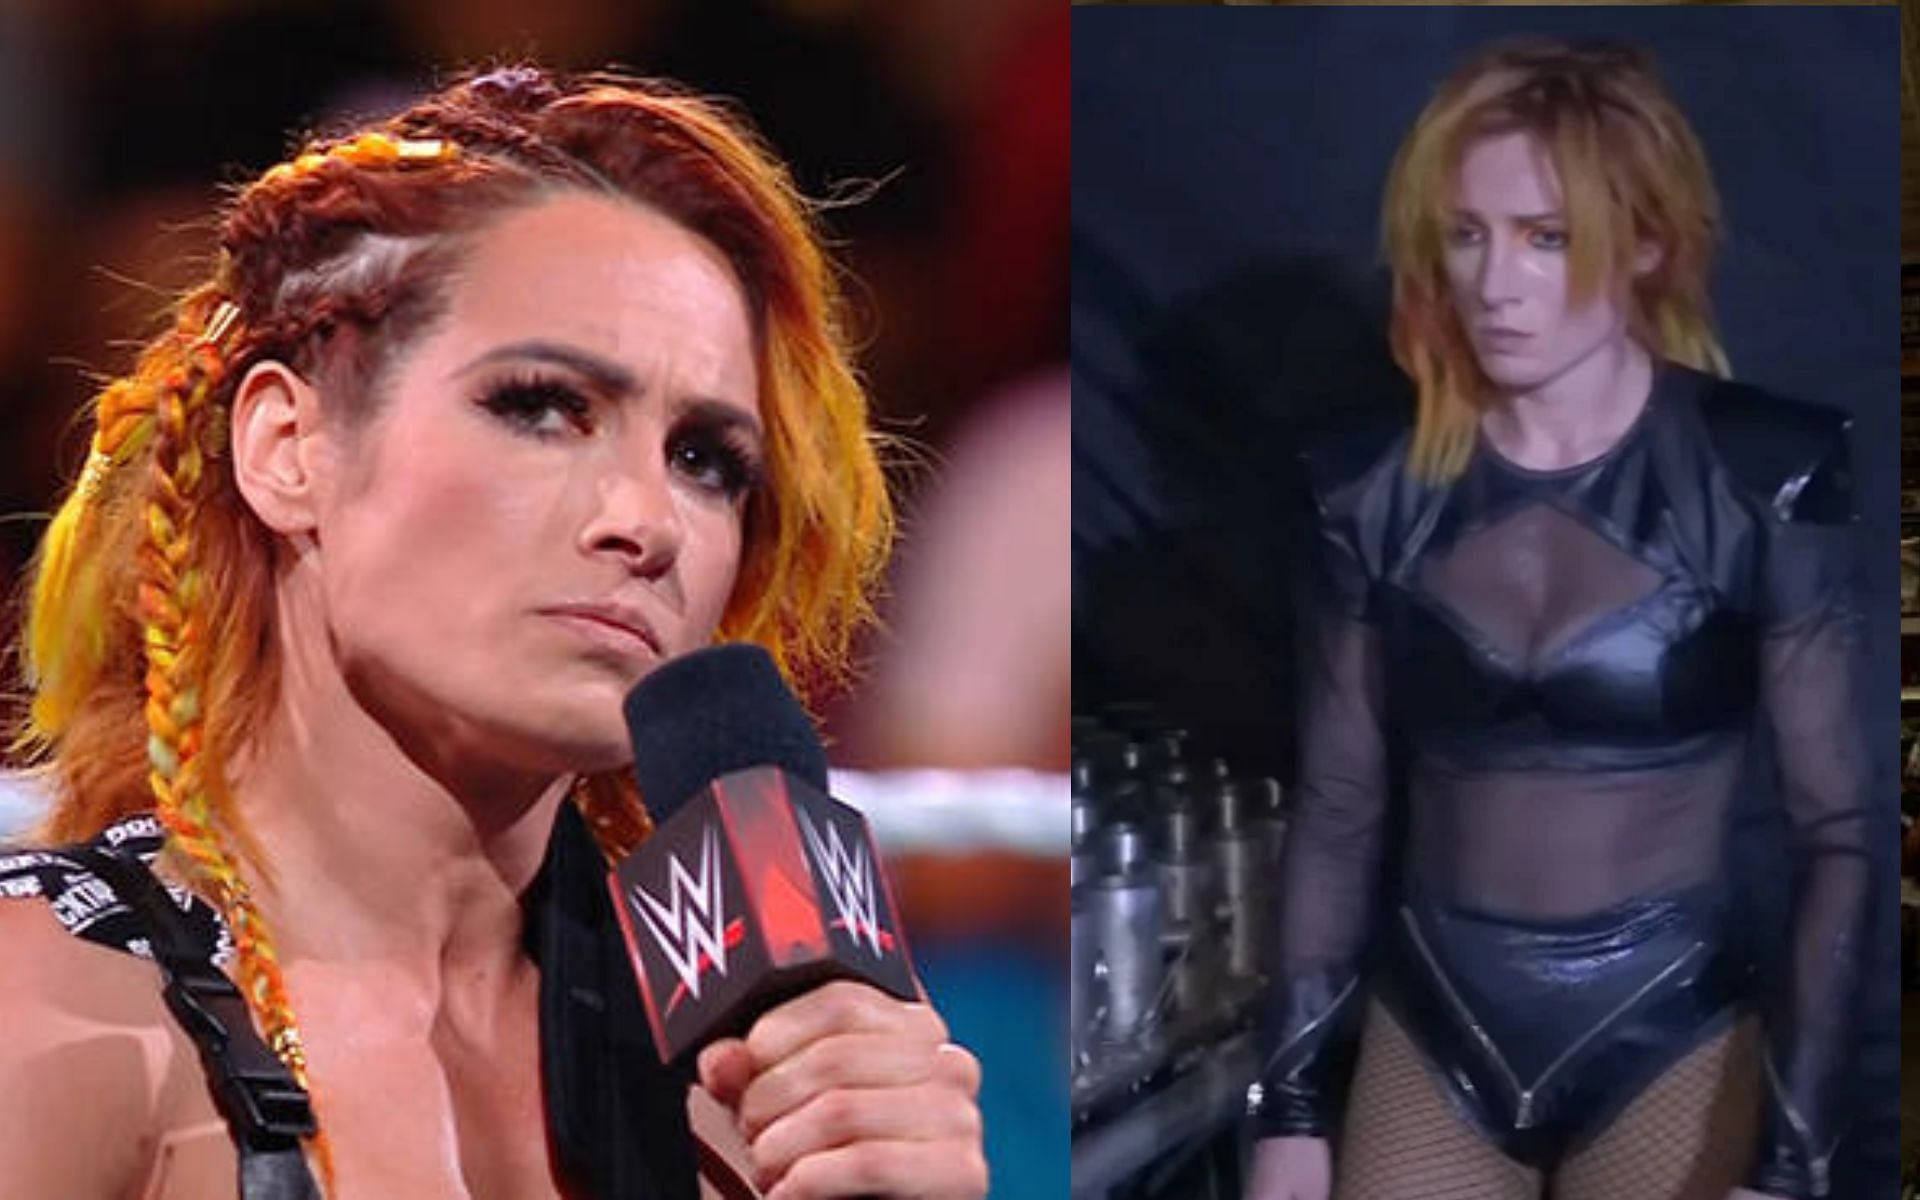 Becky Lynch has been reported to be returning to WWE